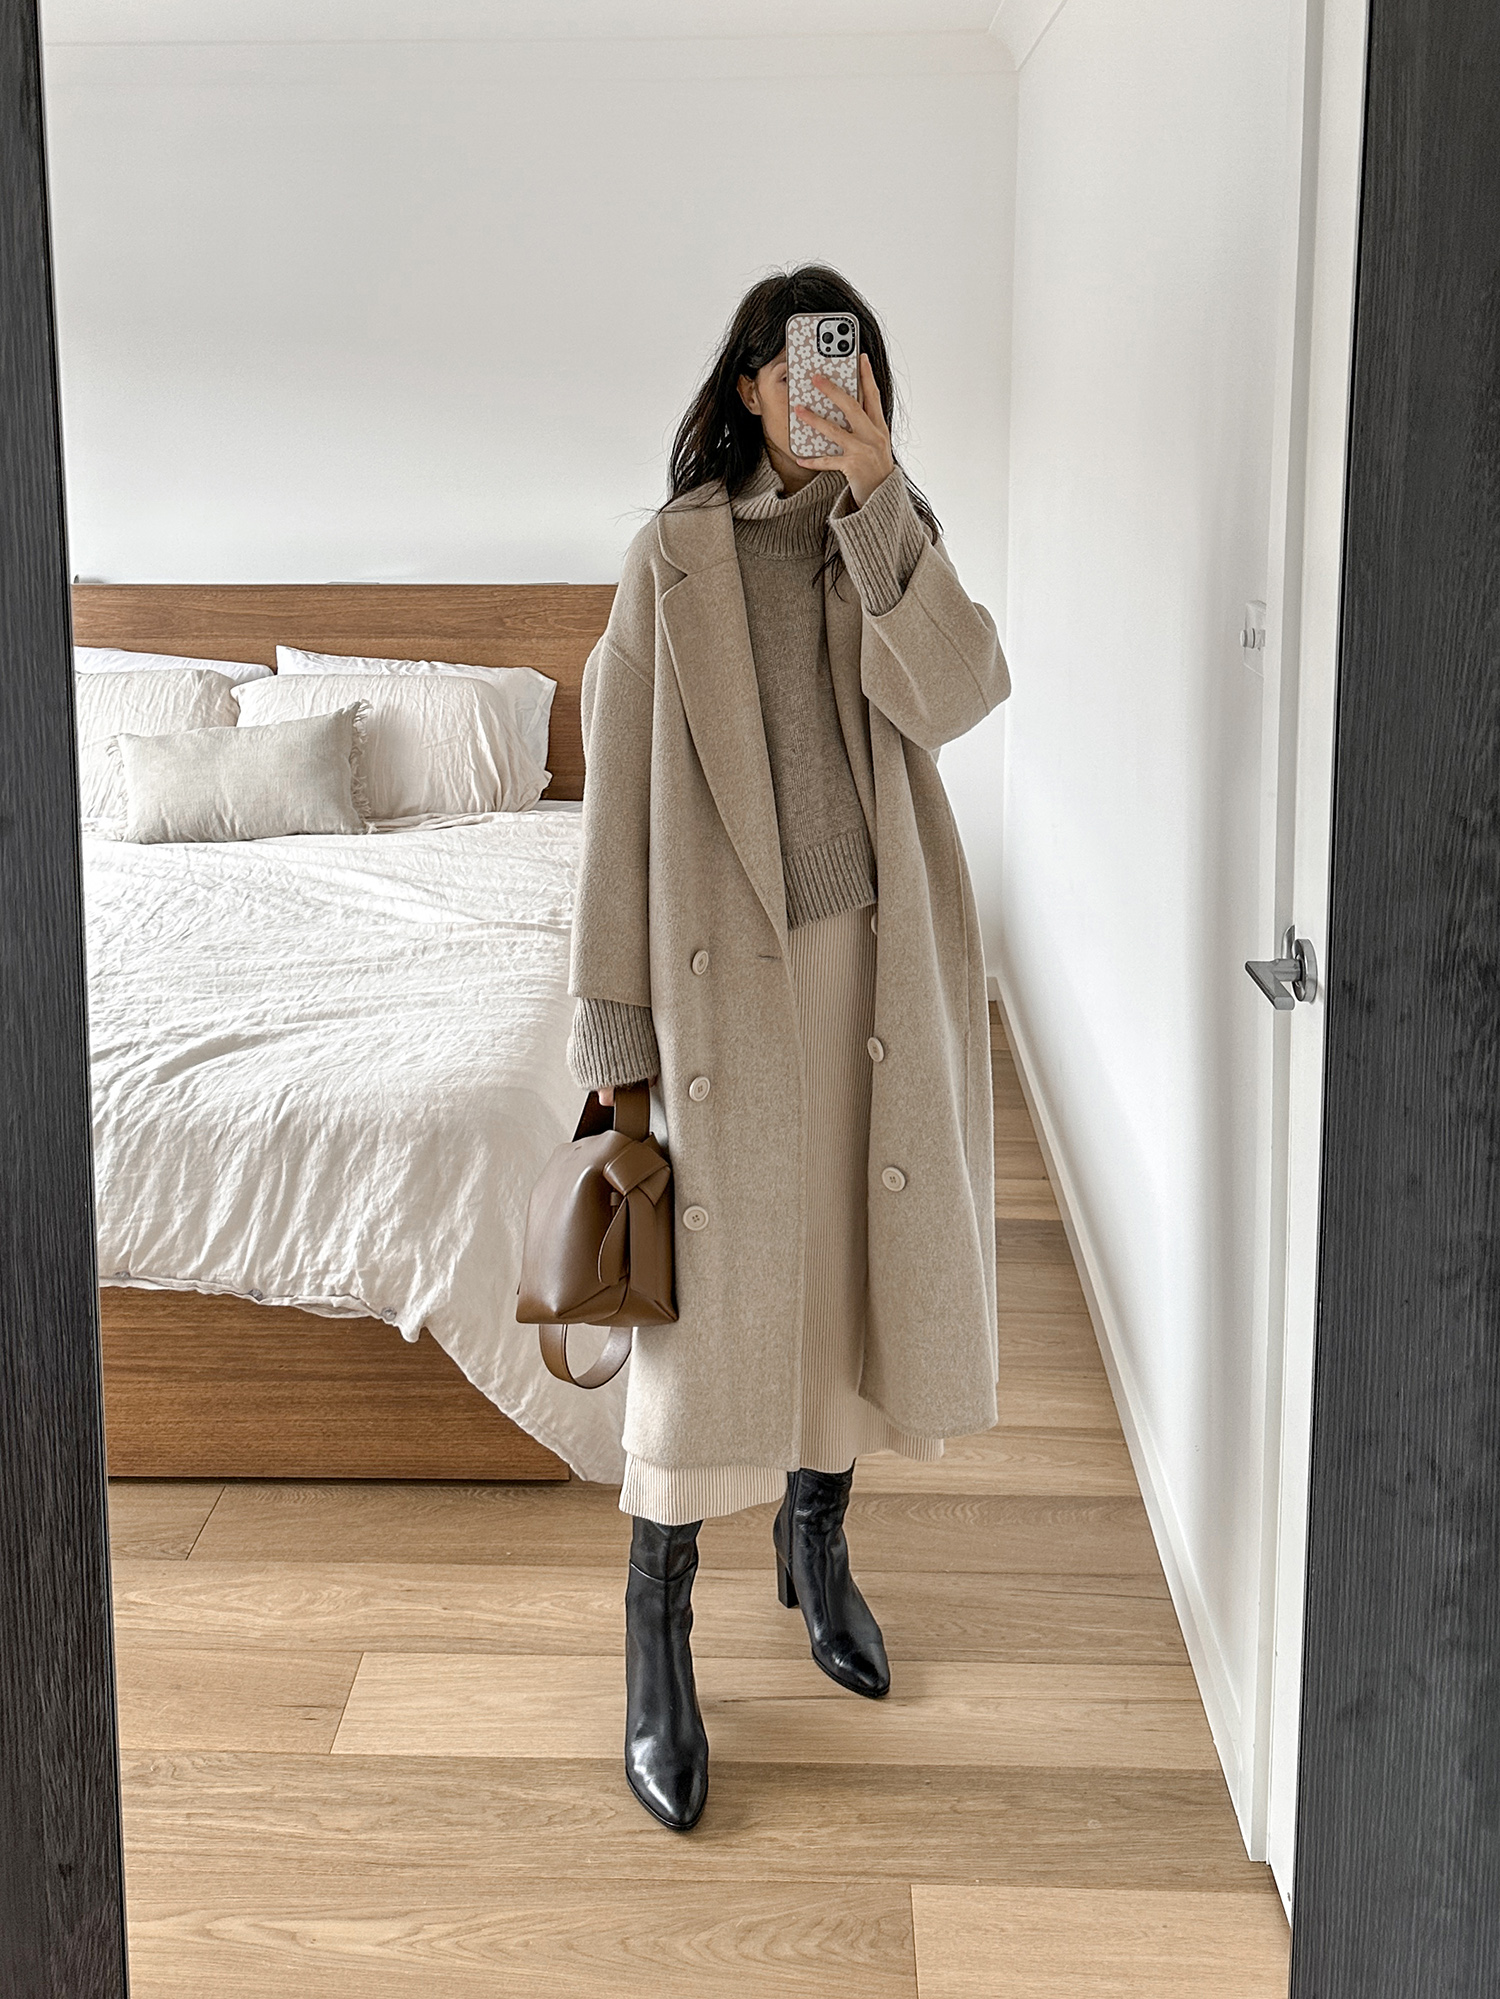 Winter fashion inspo: 5 different cold weather outfit ideas - The